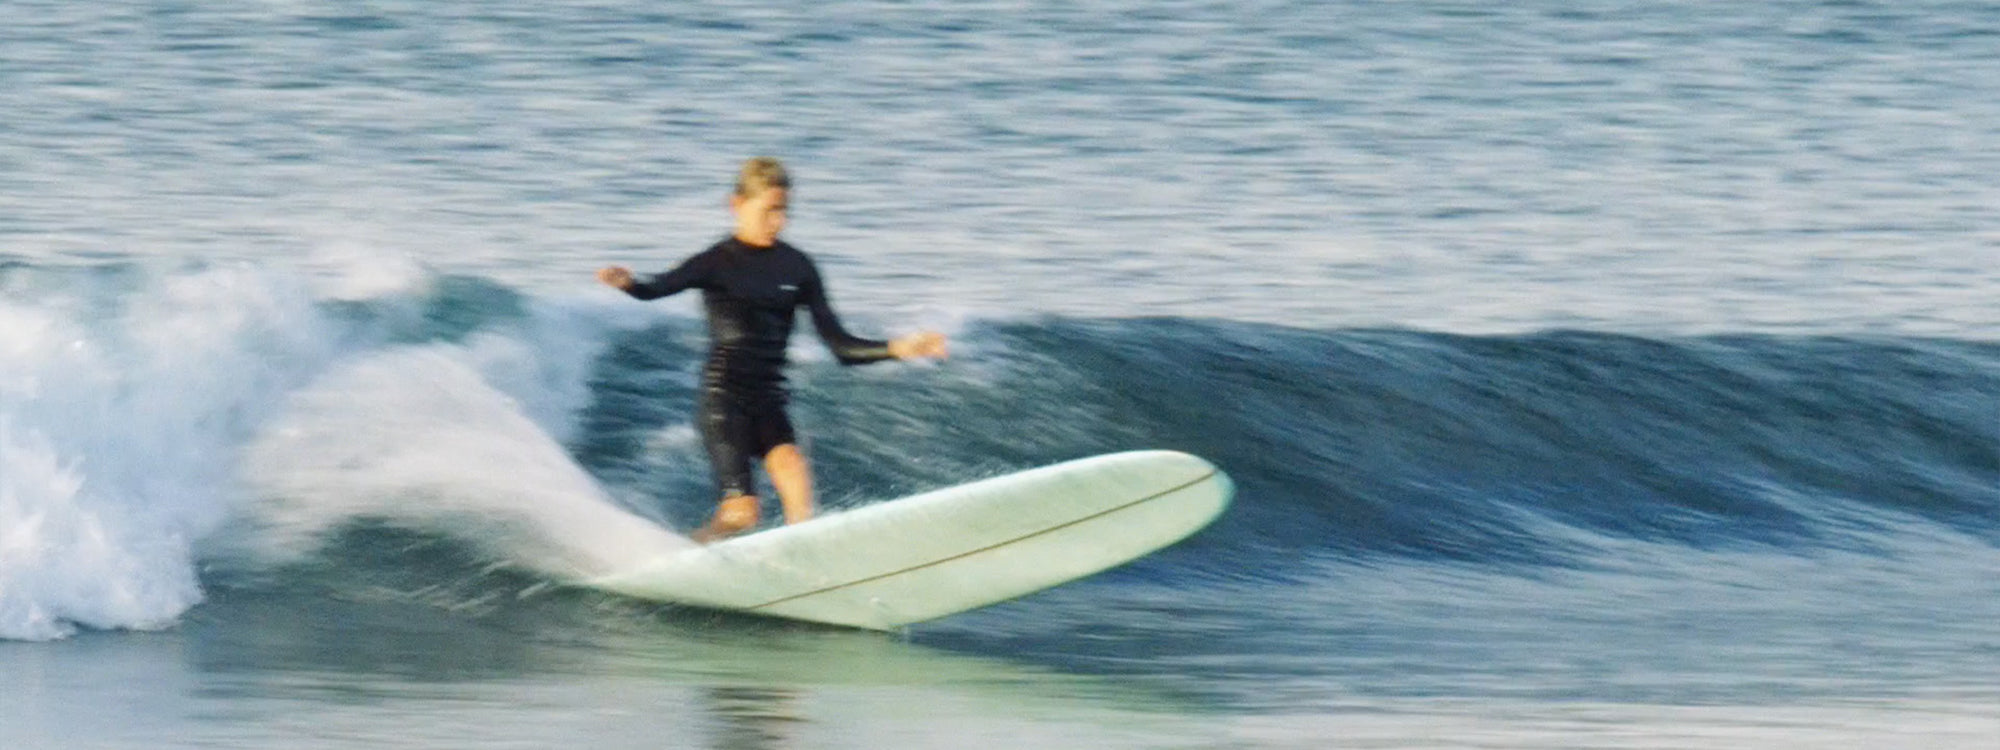 Bing Surf Video Series by Victor Melchor - Part 2 Featuring Tommy Coleman